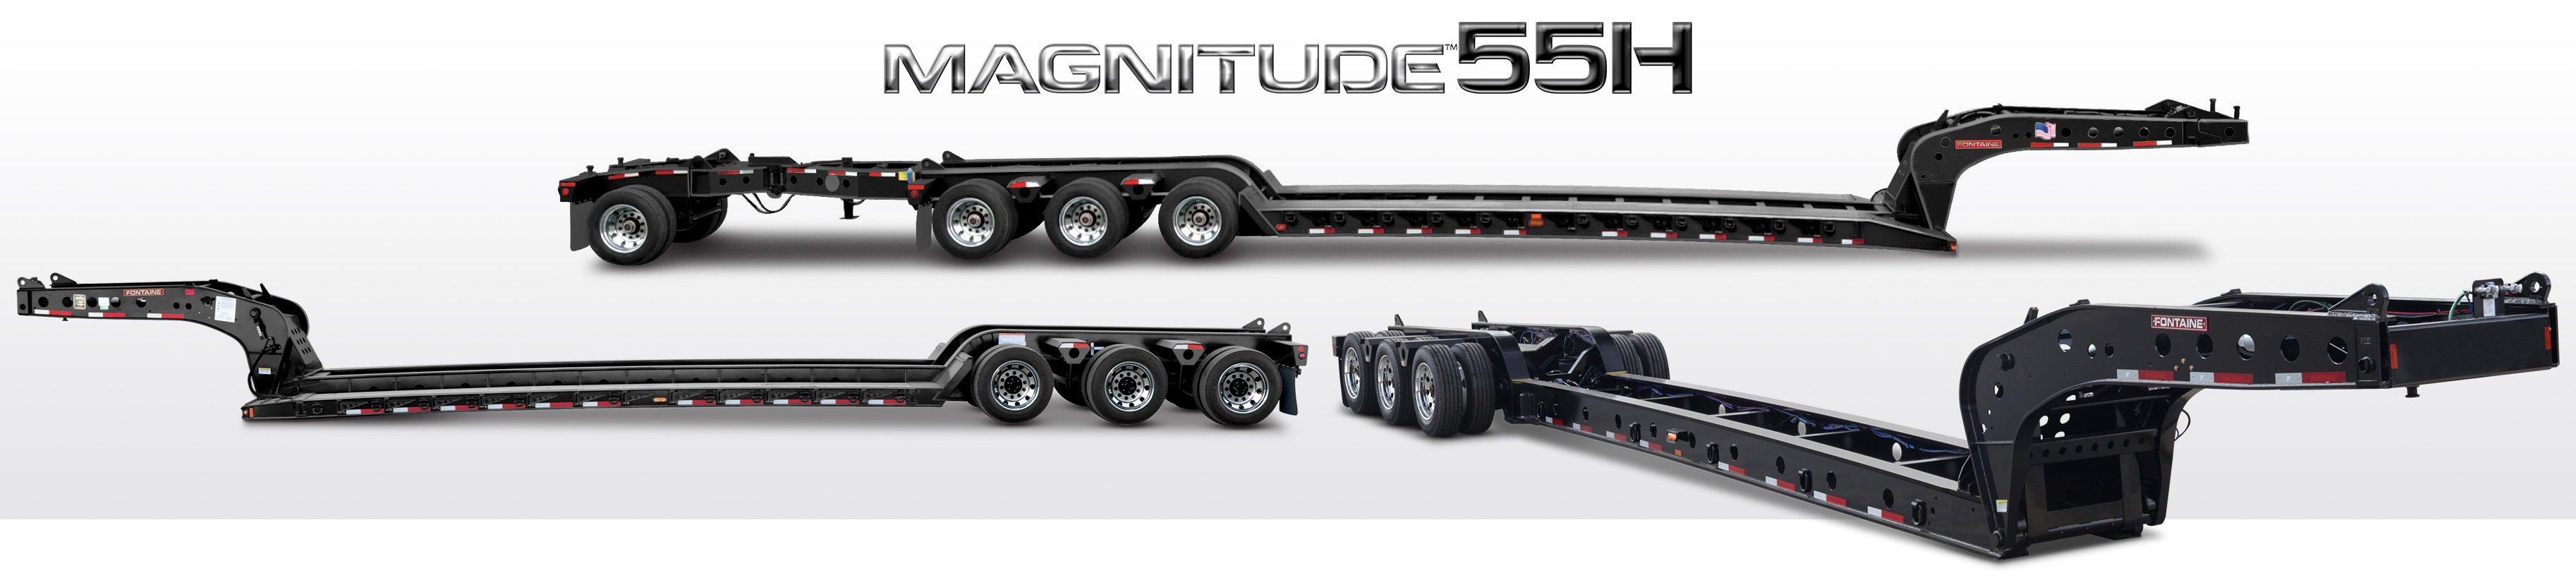 Magnitude 55H lowbed trailers